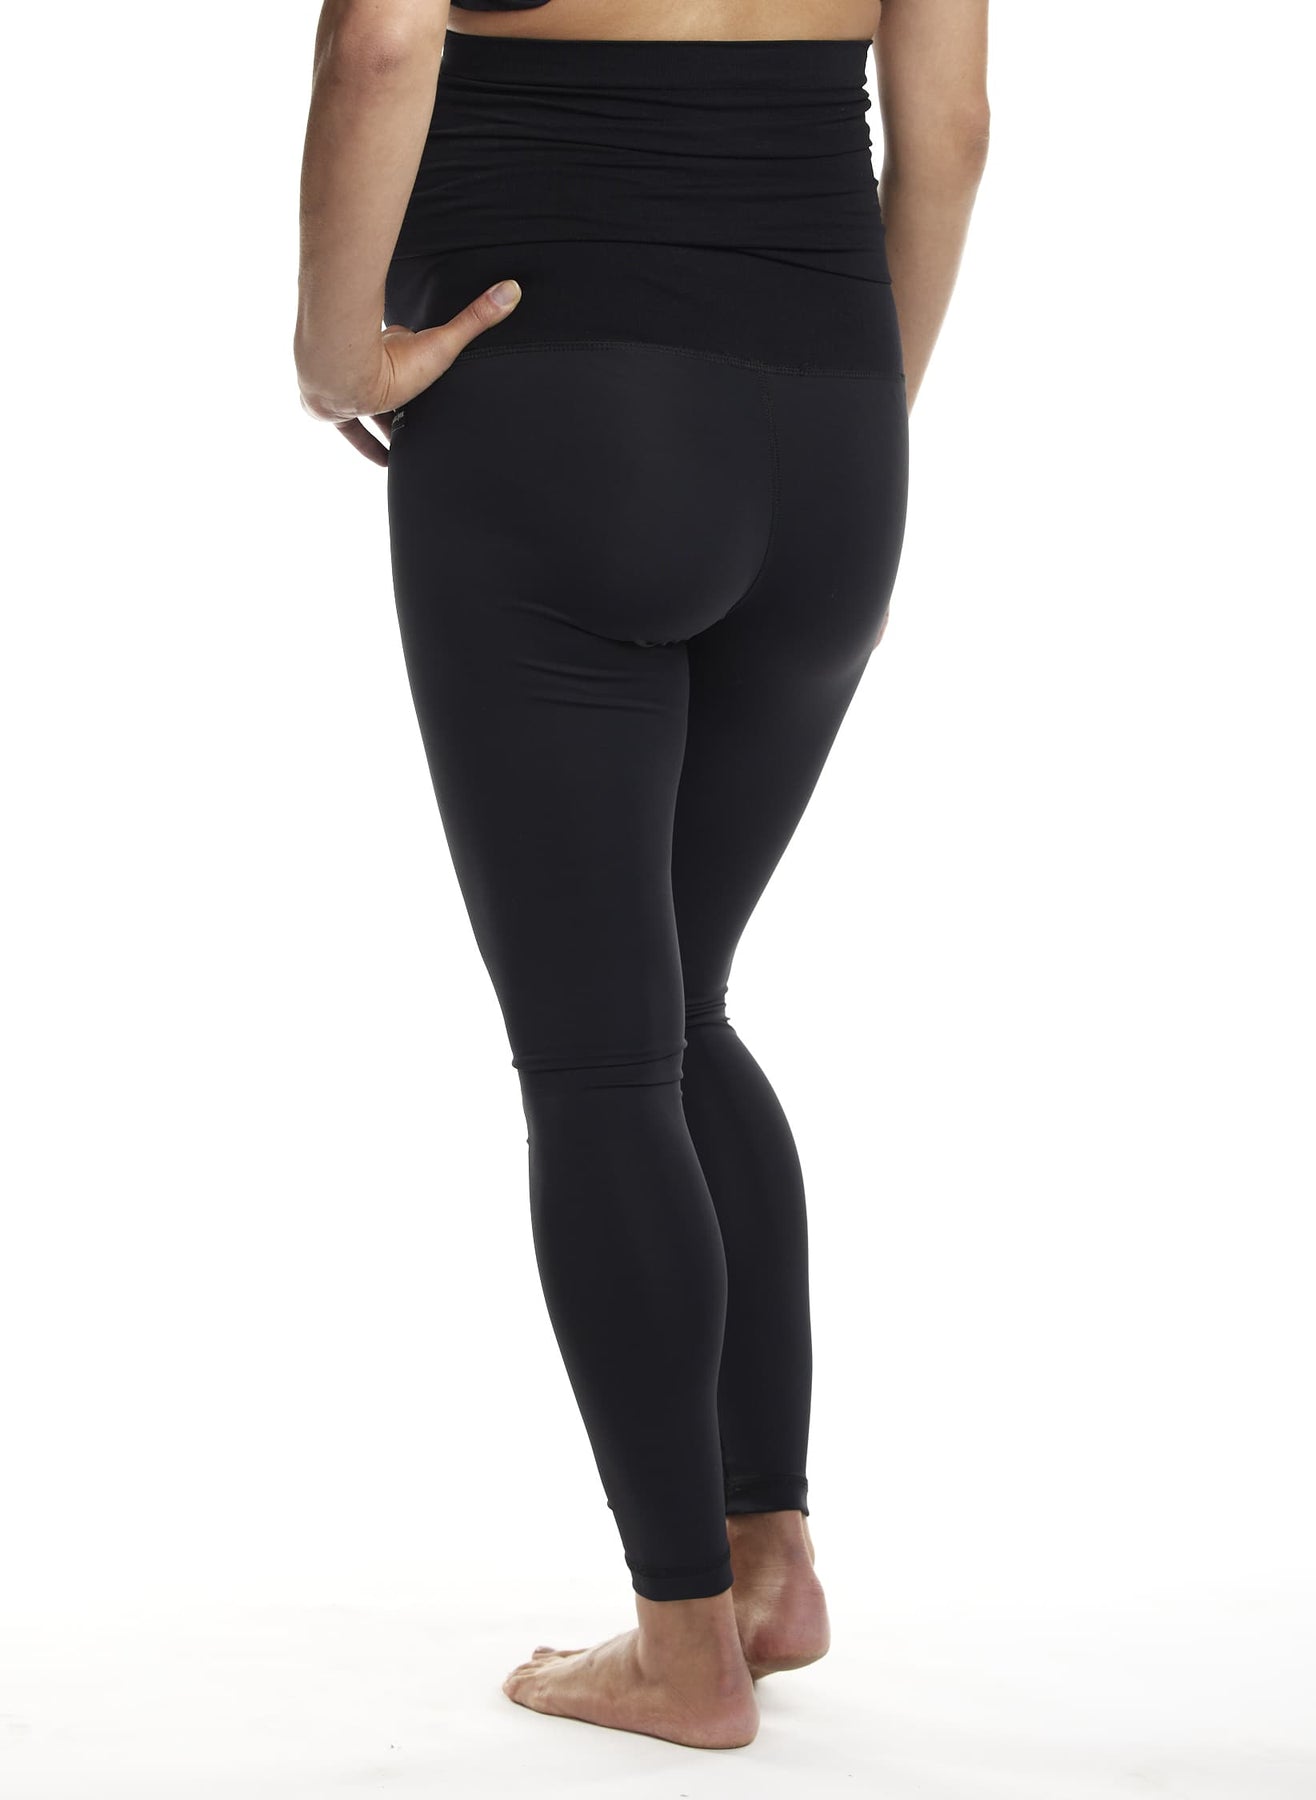 Active Maternity Leggings - High-Performance, Durable, & Midweight